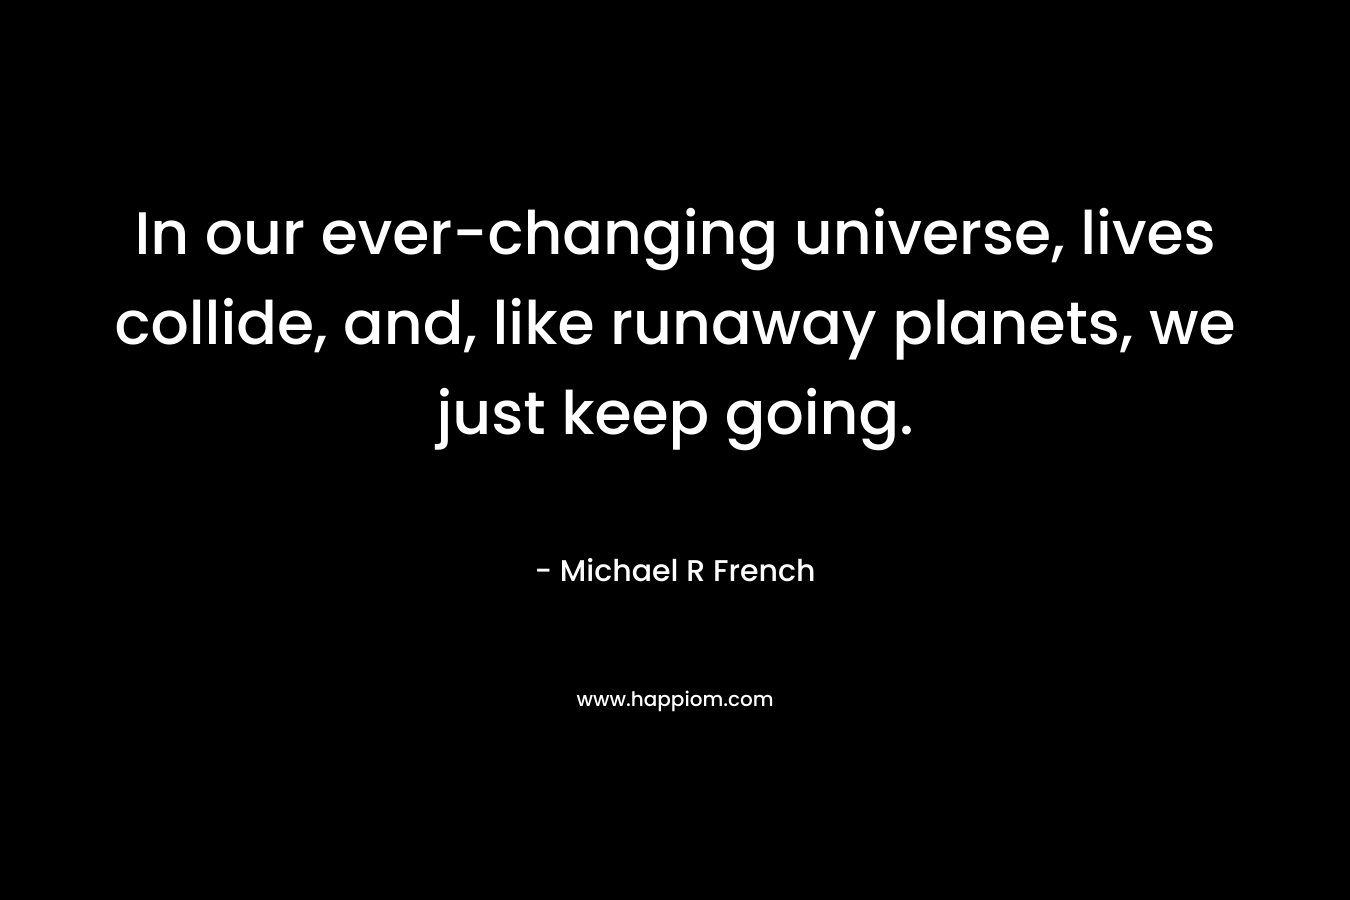 In our ever-changing universe, lives collide, and, like runaway planets, we just keep going.